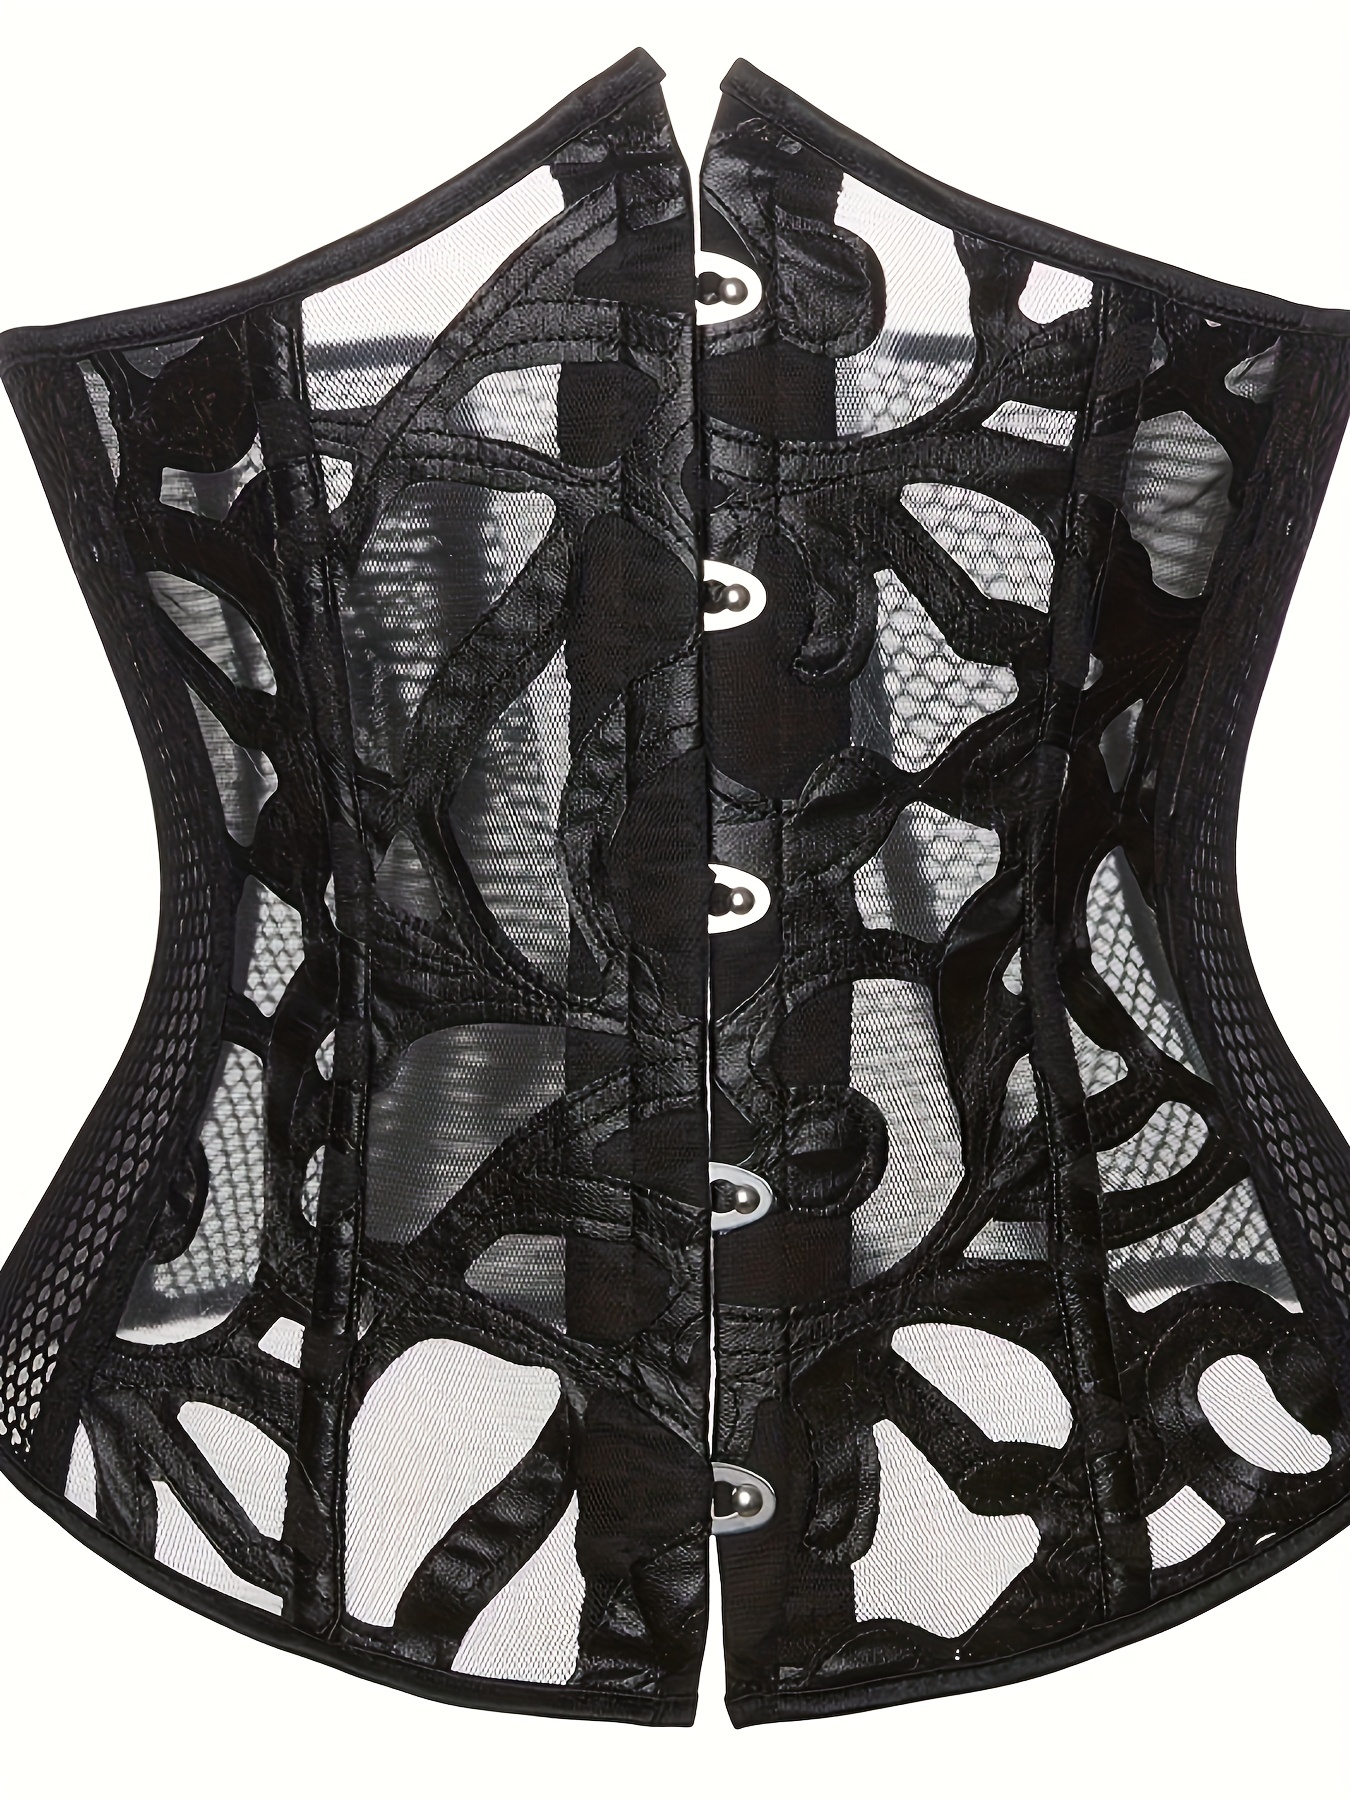 Fishnet Mesh Corset Bustier, Tummy Control Lace Up Strapless Body